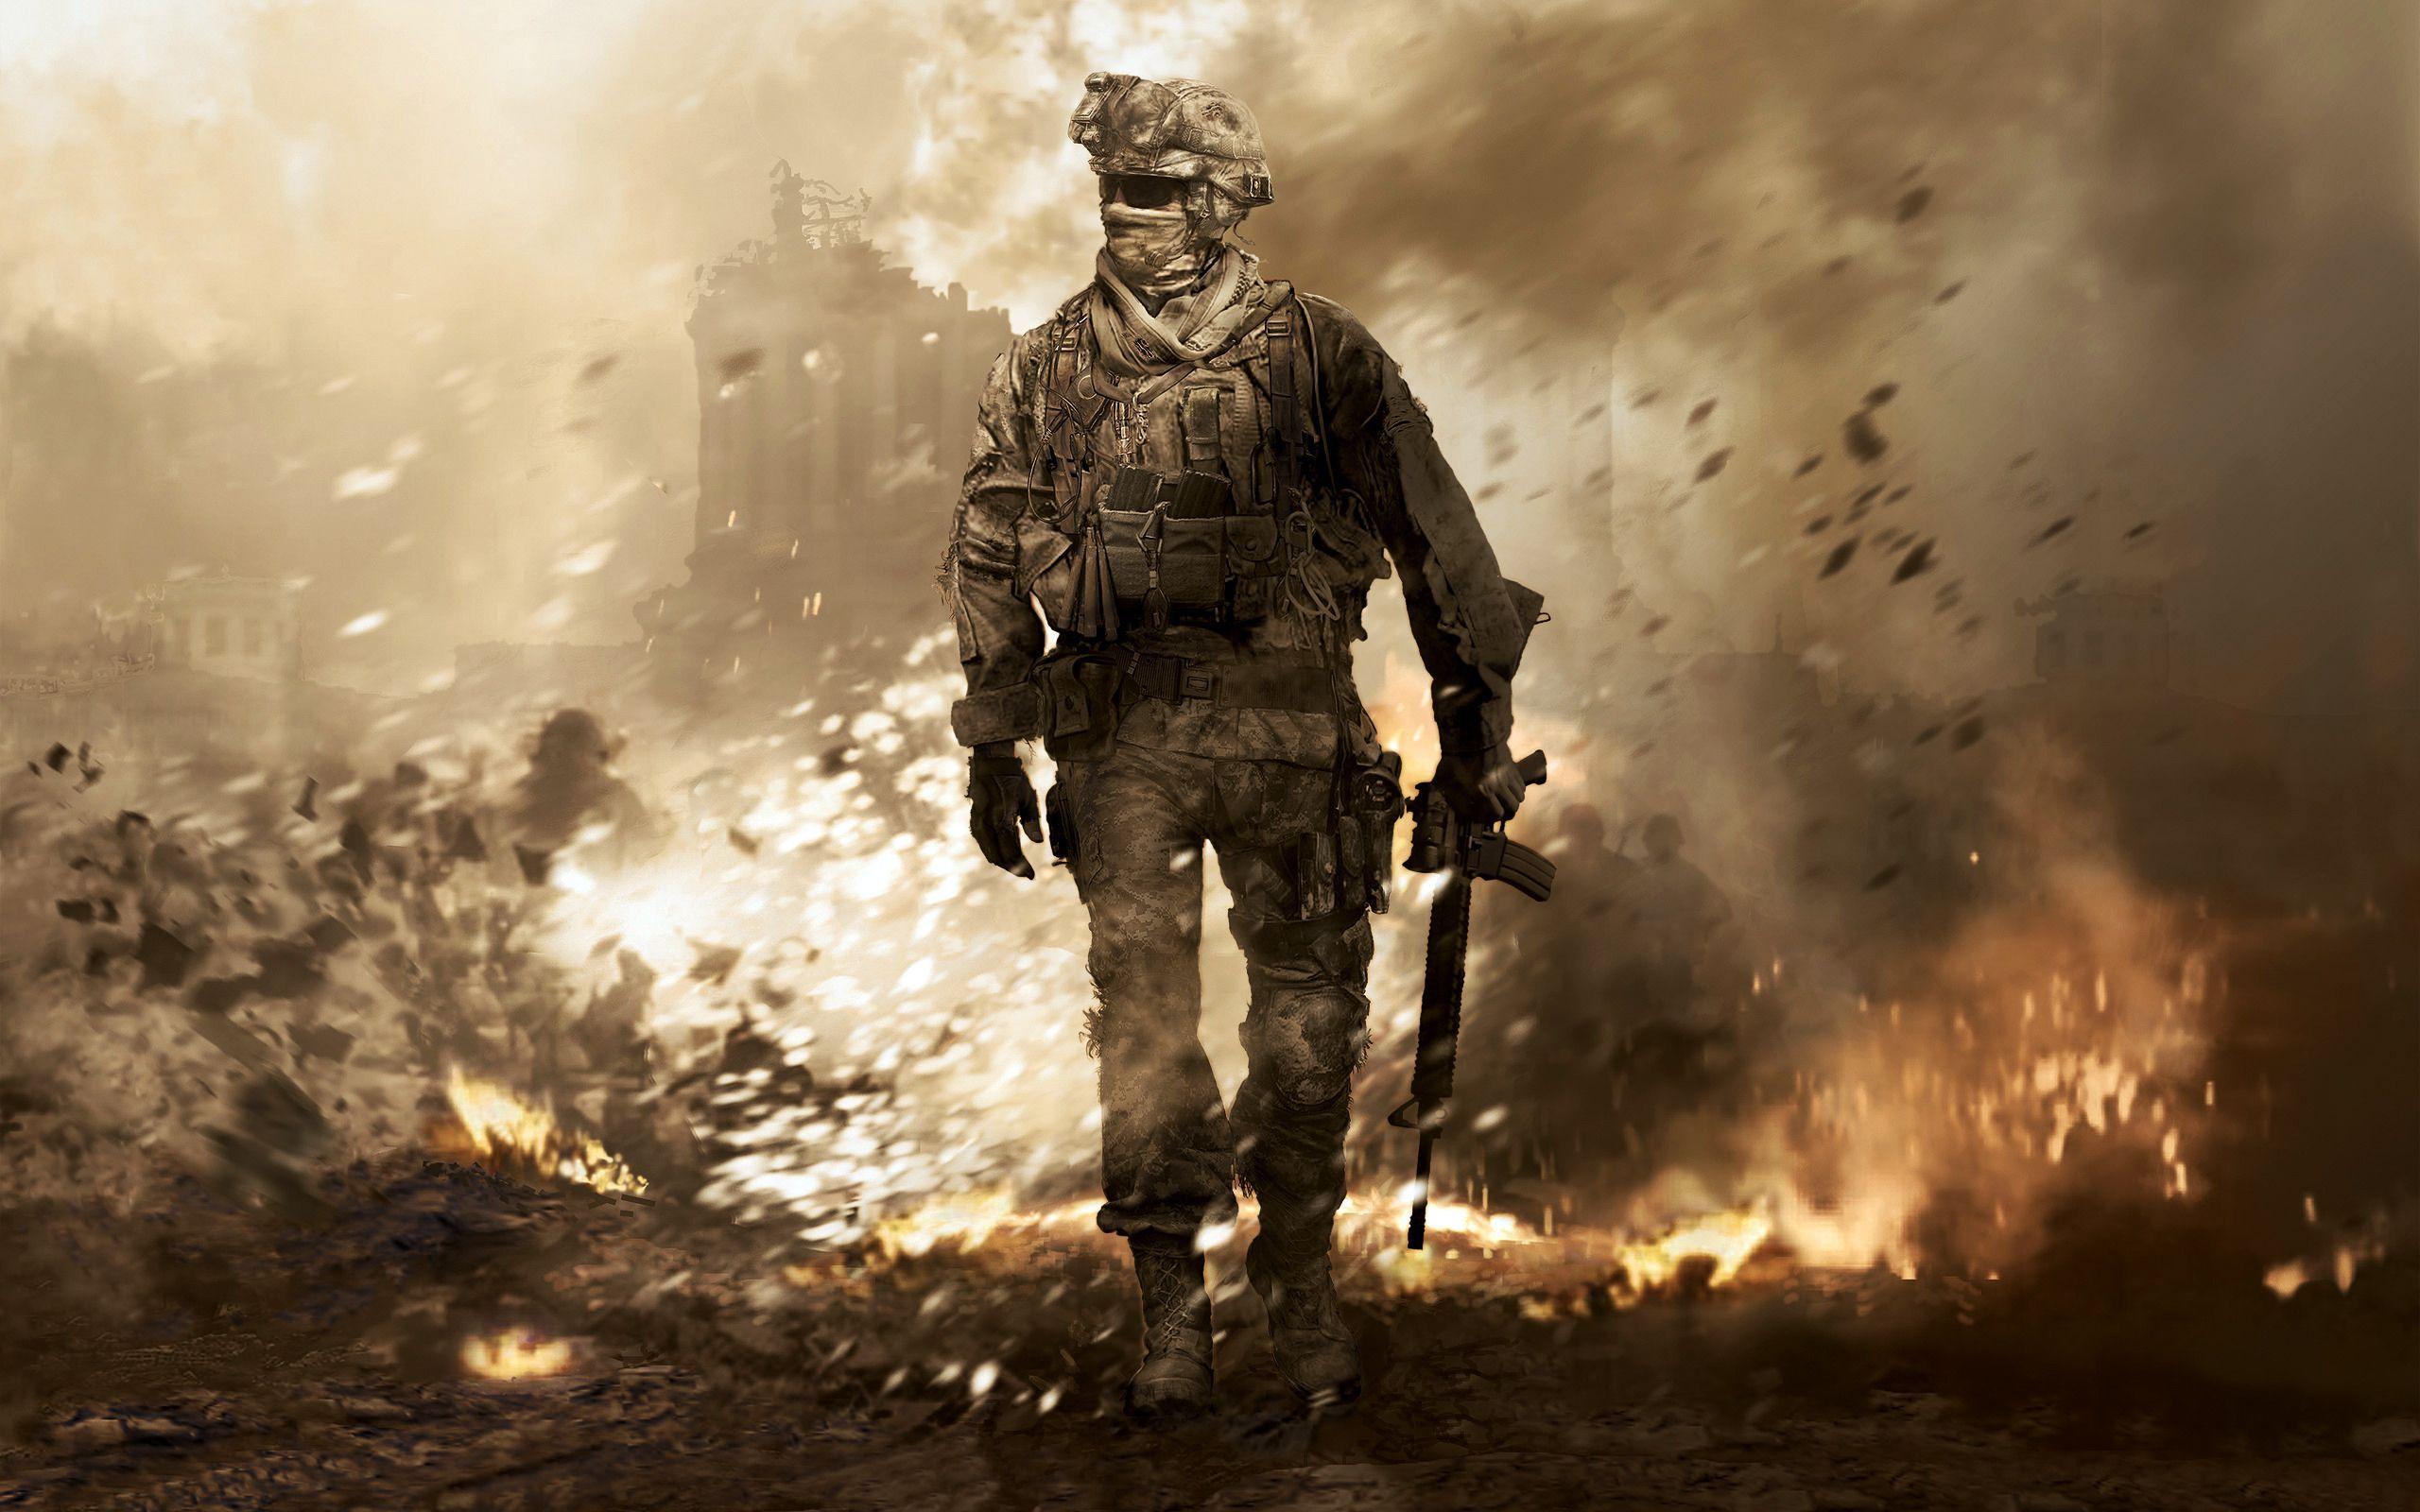 Call of Duty Modern Warfare HD Wallpapers and 4K Backgrounds